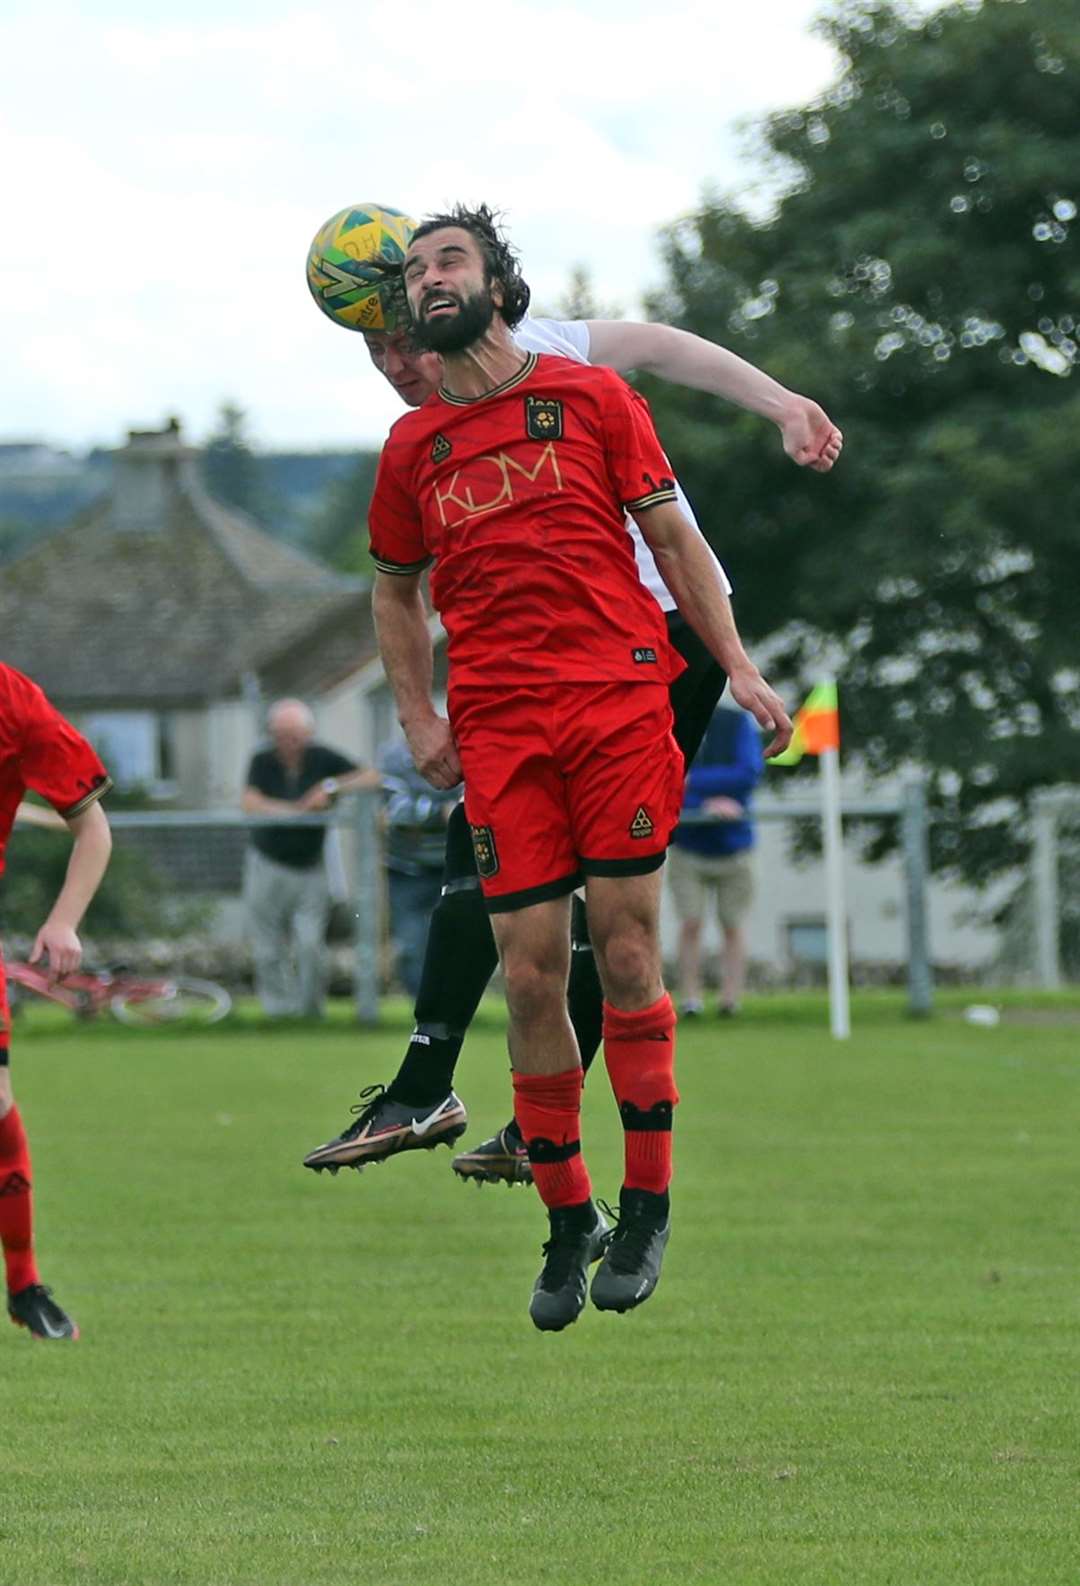 Phil Macdonald of Loch Ness in an aerial duel with Innes Mackintosh of Halkirk United. Picture: James Gunn